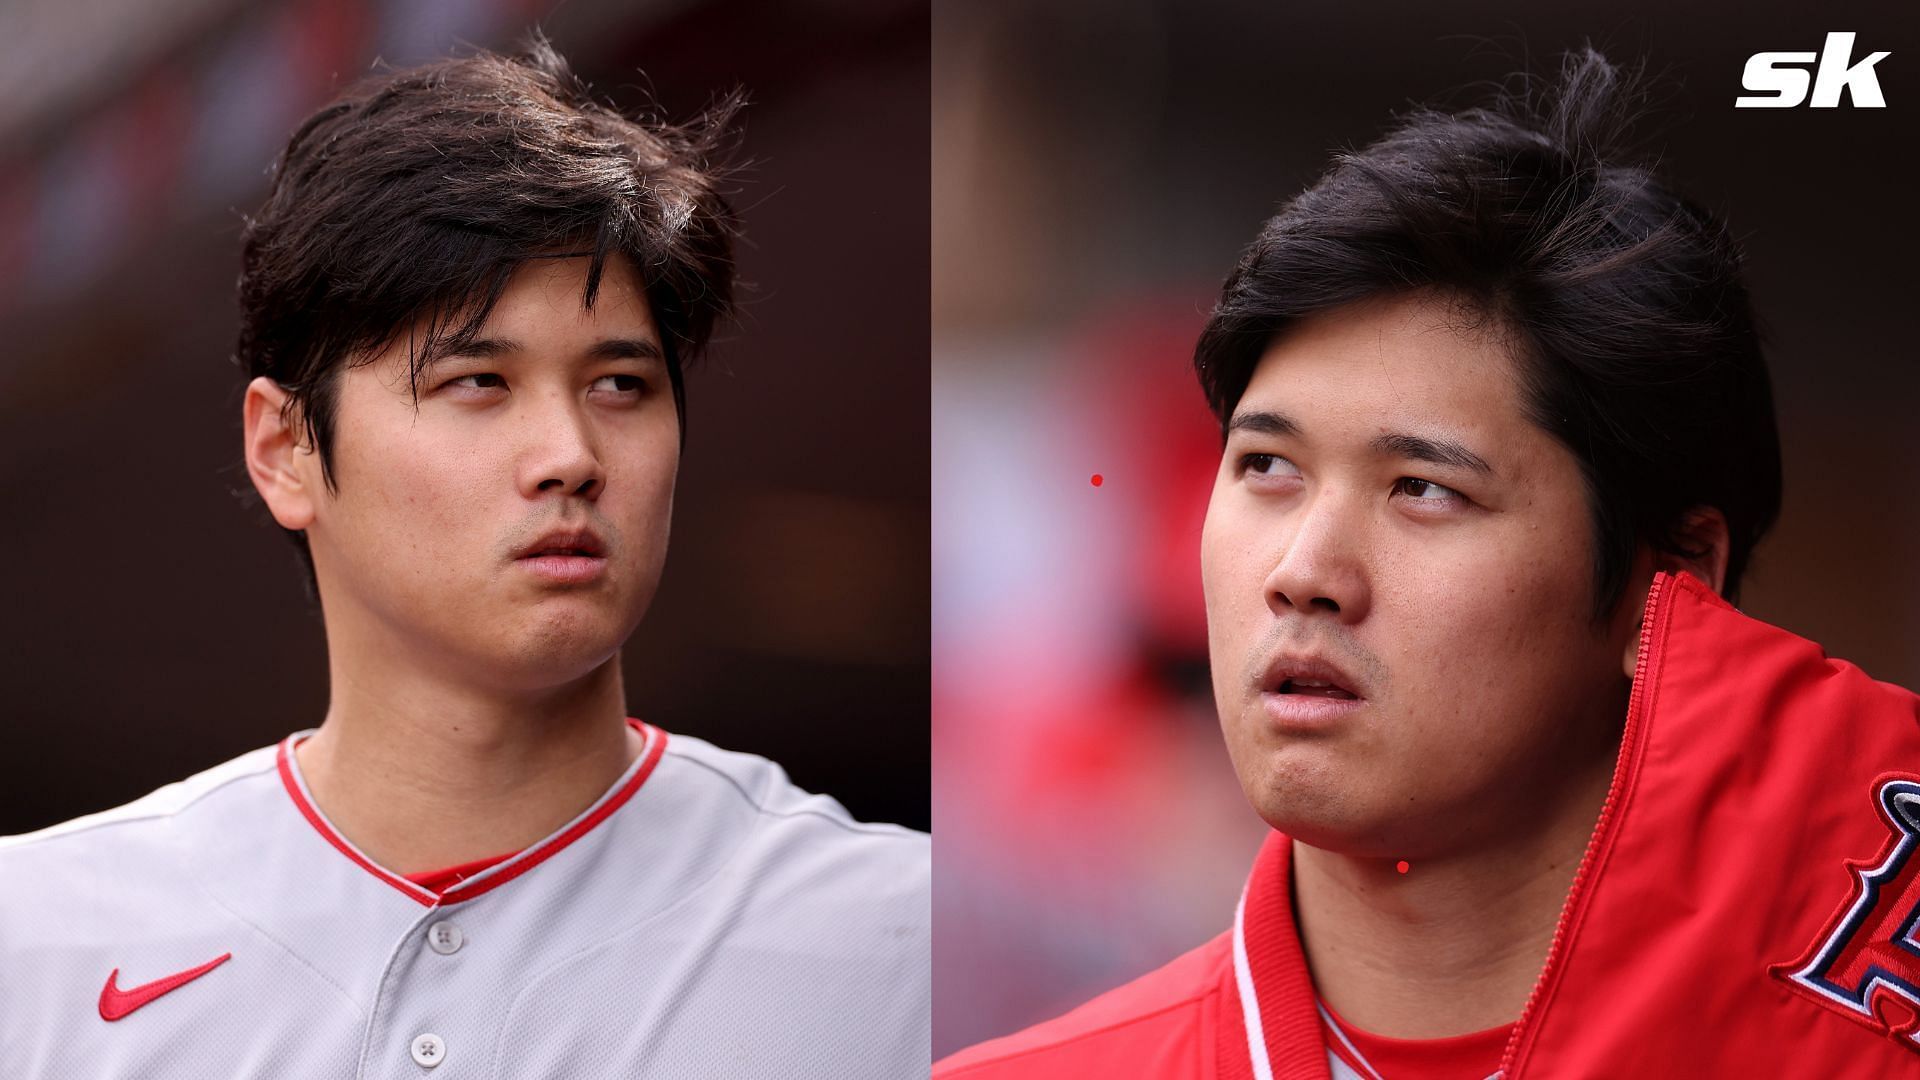 The Seattle Mariners may be making a big play to ink Shohei Ohtani this winter